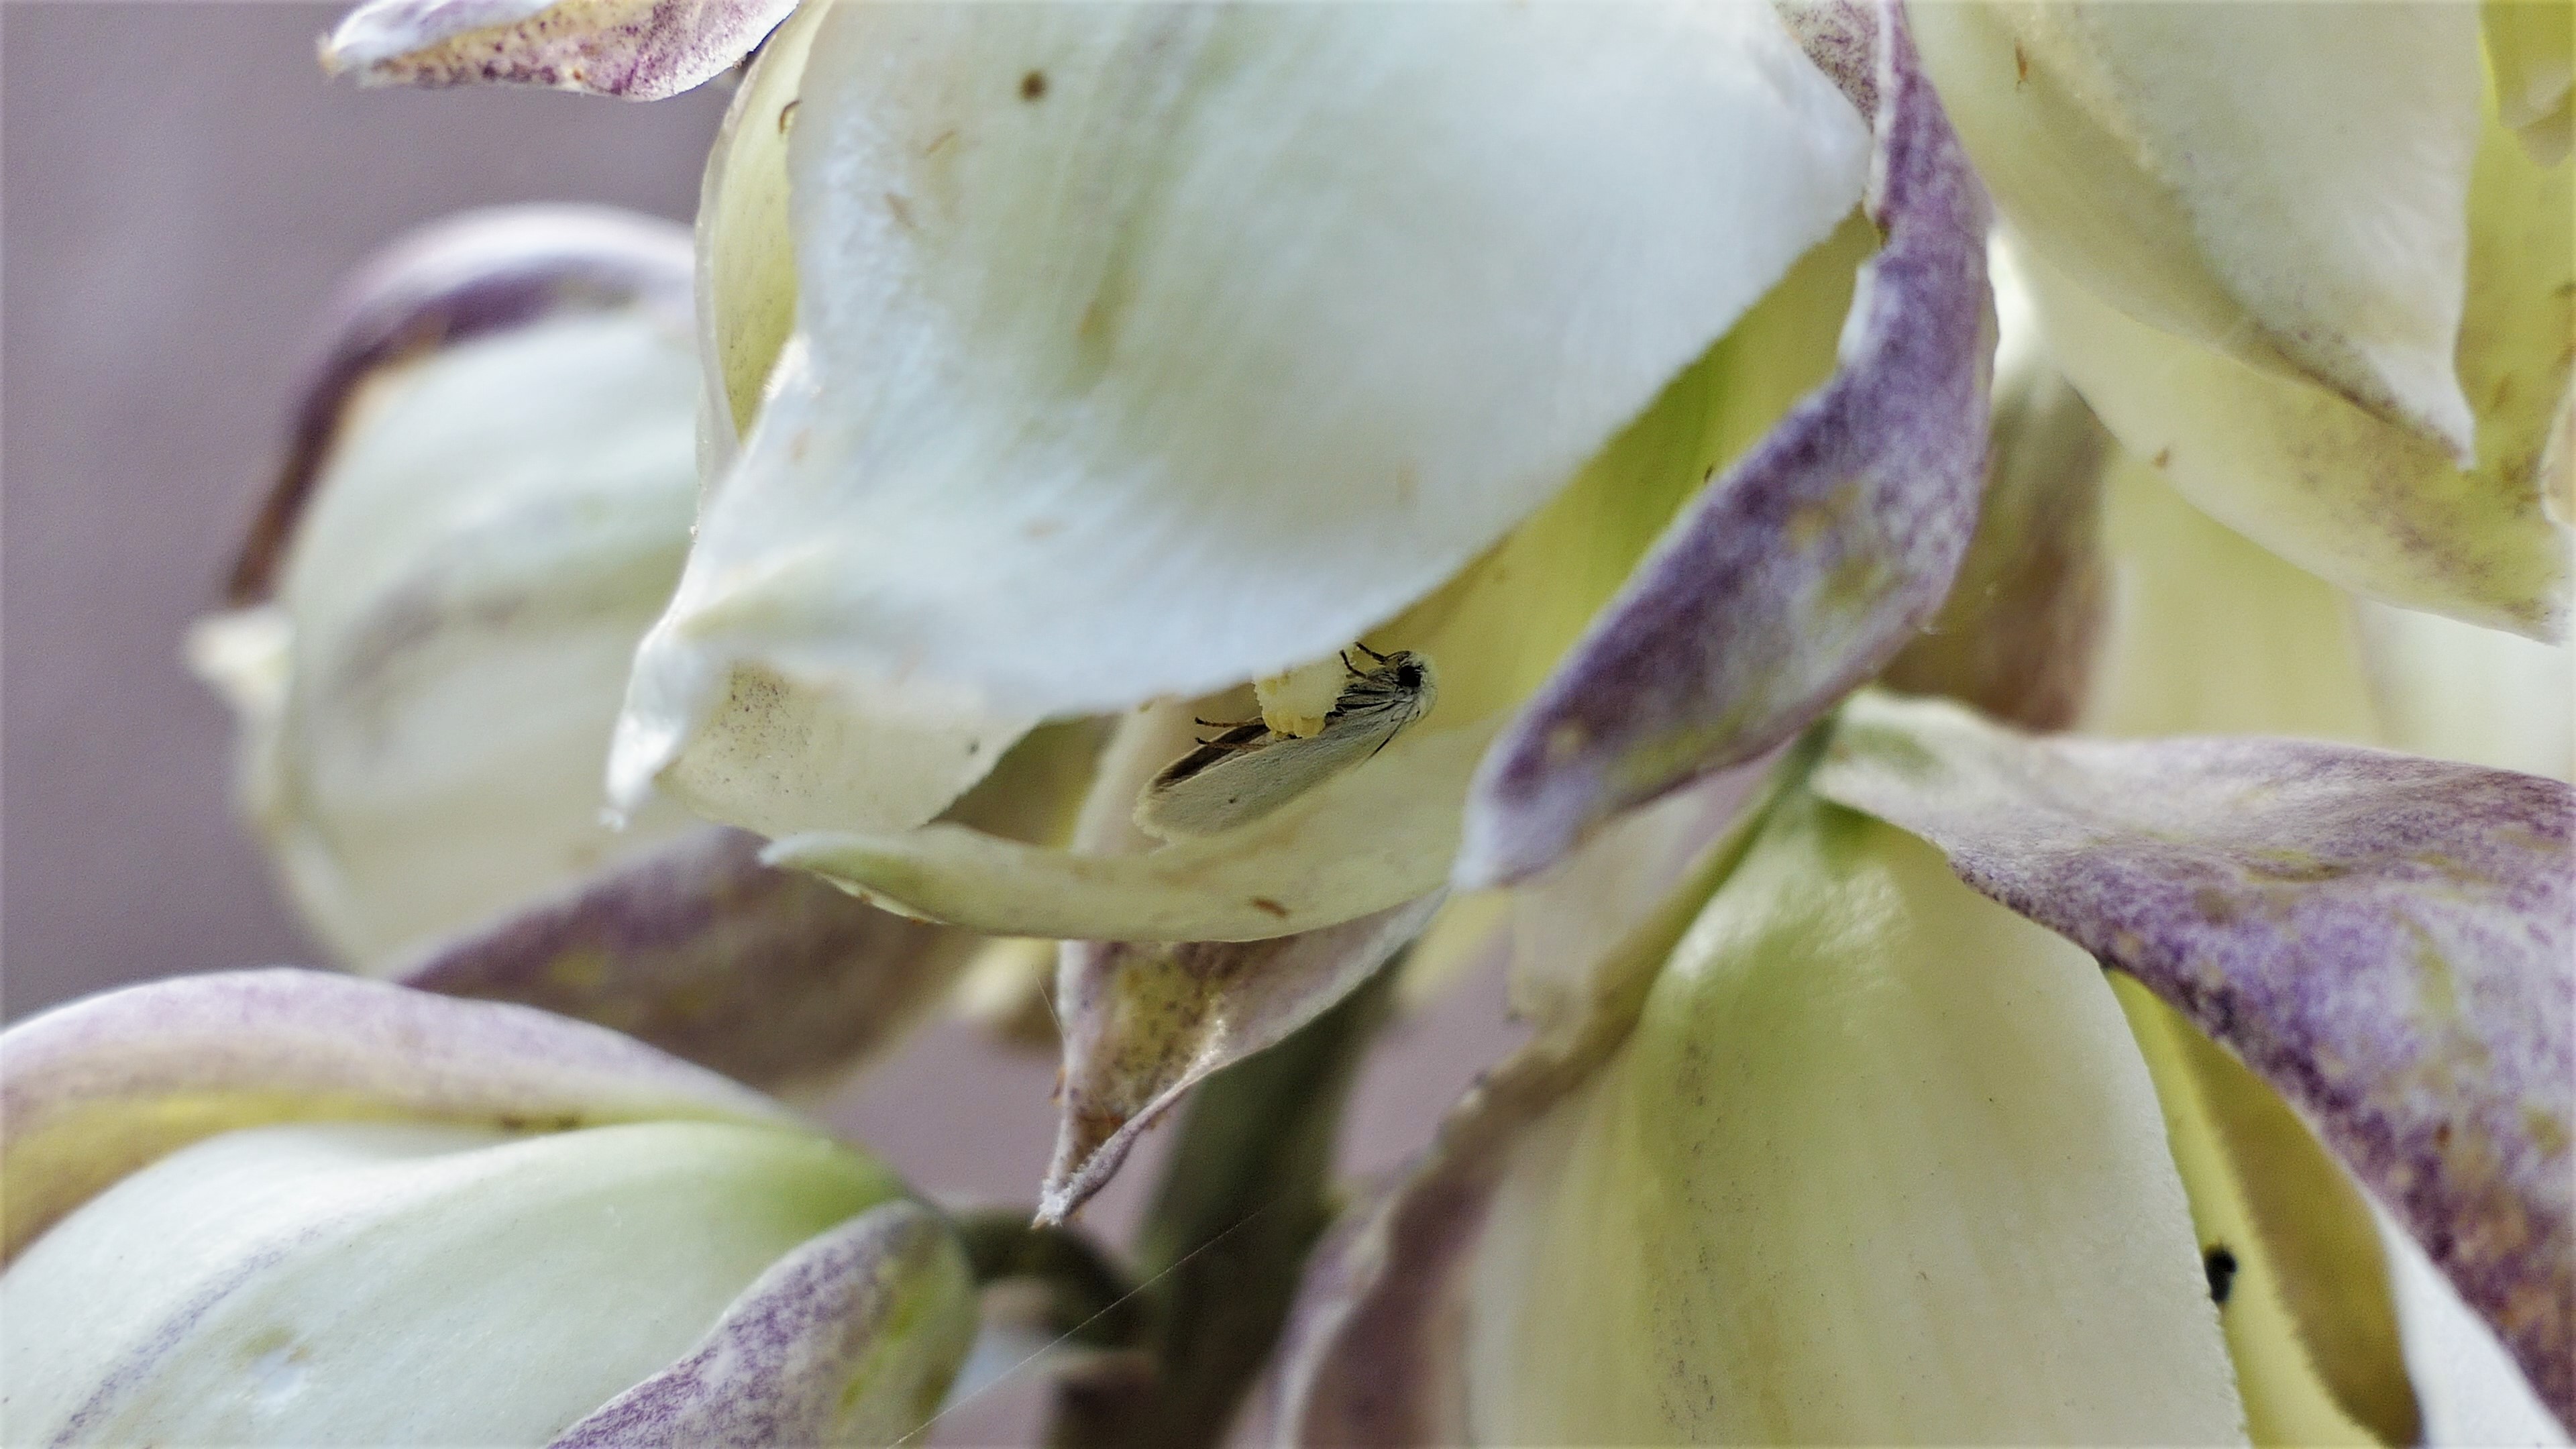 Hidden away inside the creamy-white flowers of a yucca plant, the yucca moth is gathering pollen